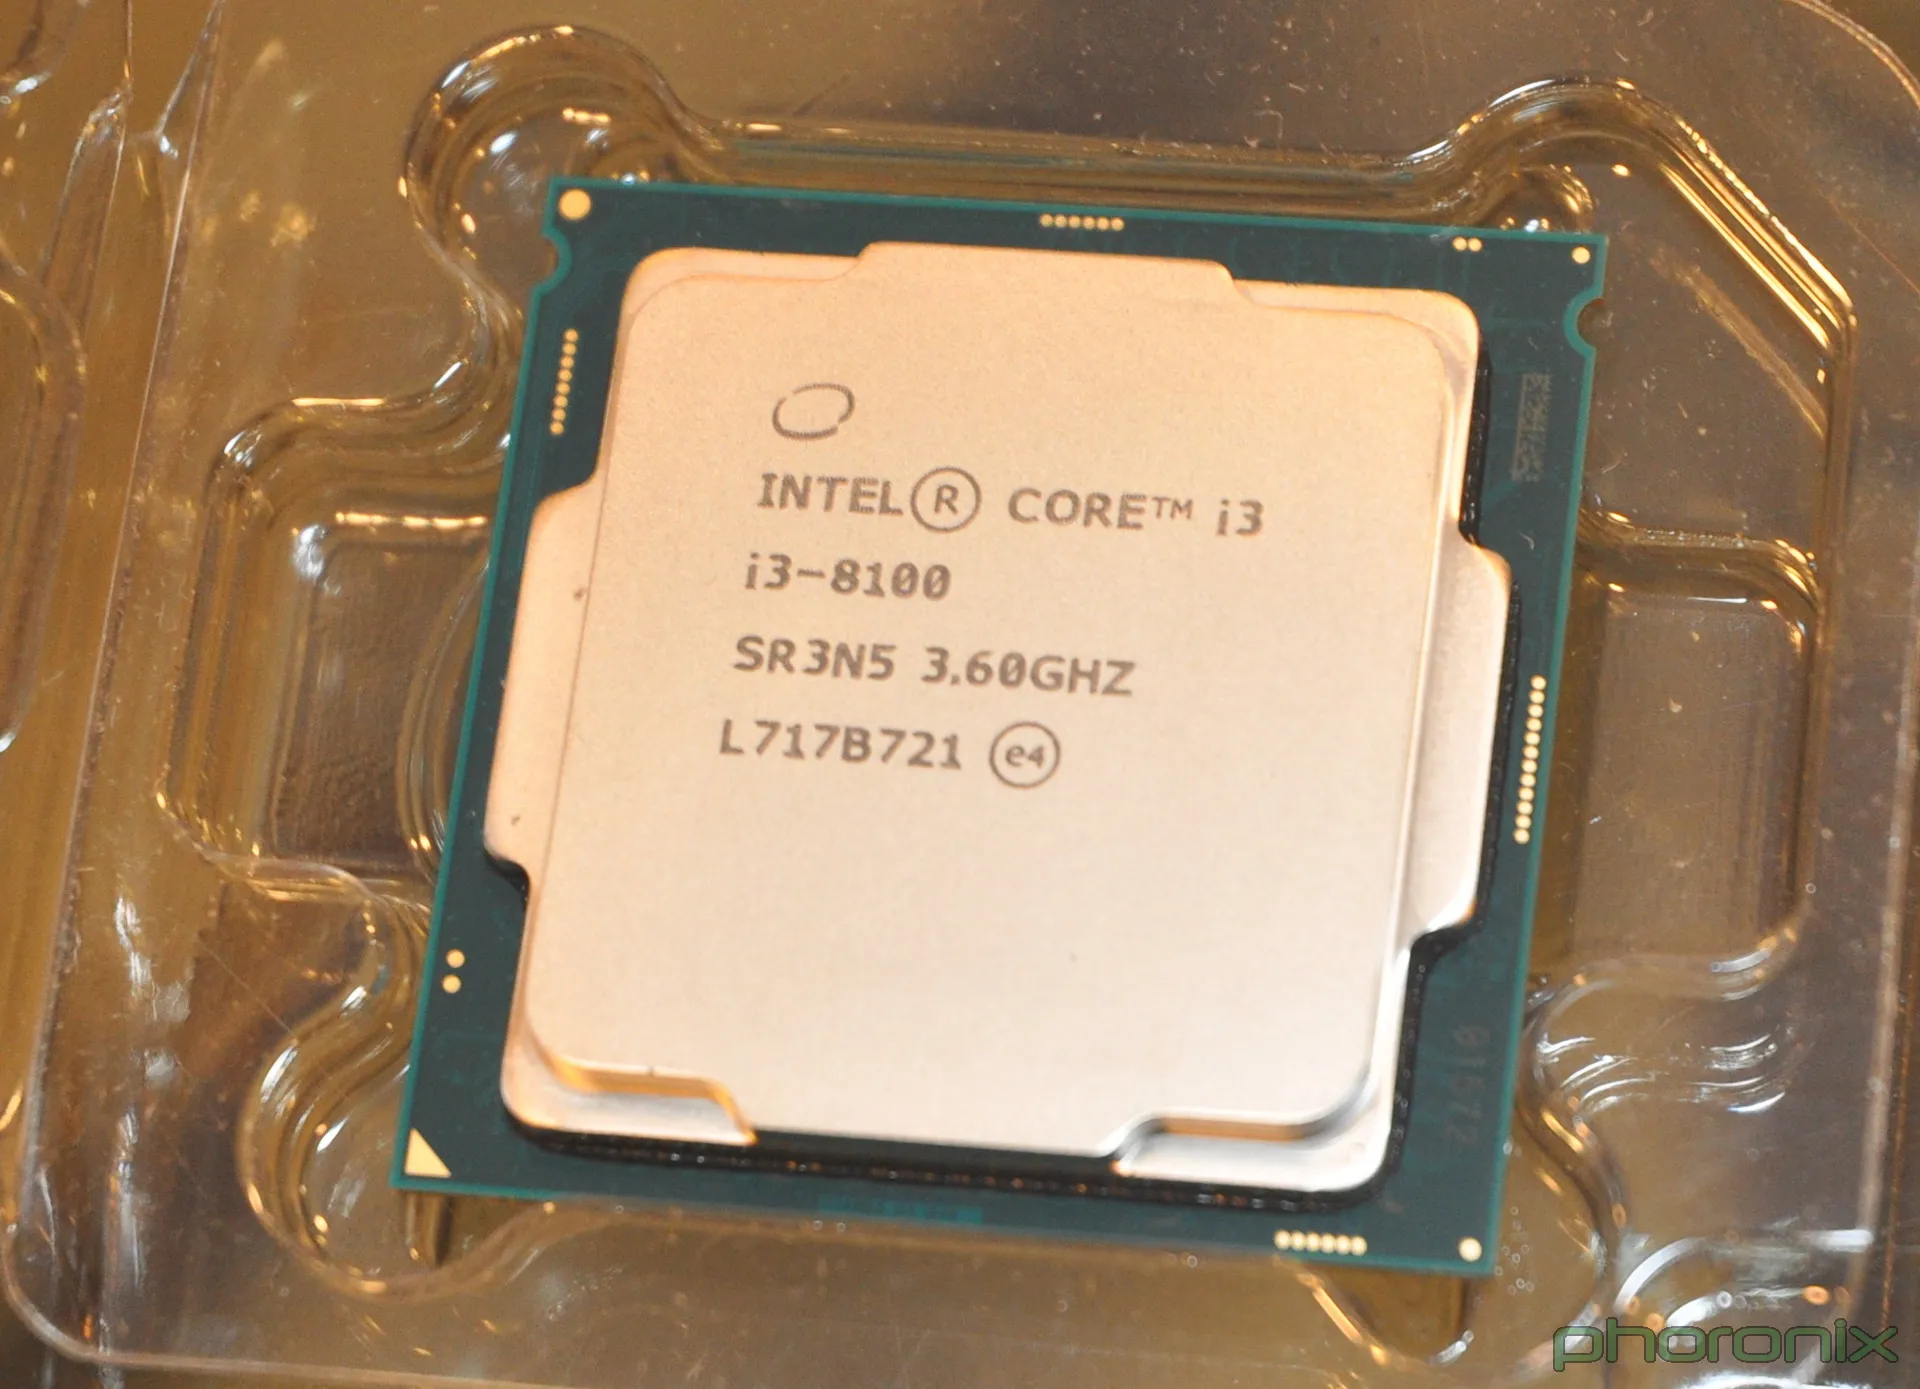 Jachtluipaard Afwijzen wetgeving Intel Core i3 8100: 3.6GHz Quad-Core With UHD Graphics For Less Than $120  USD Review - Phoronix